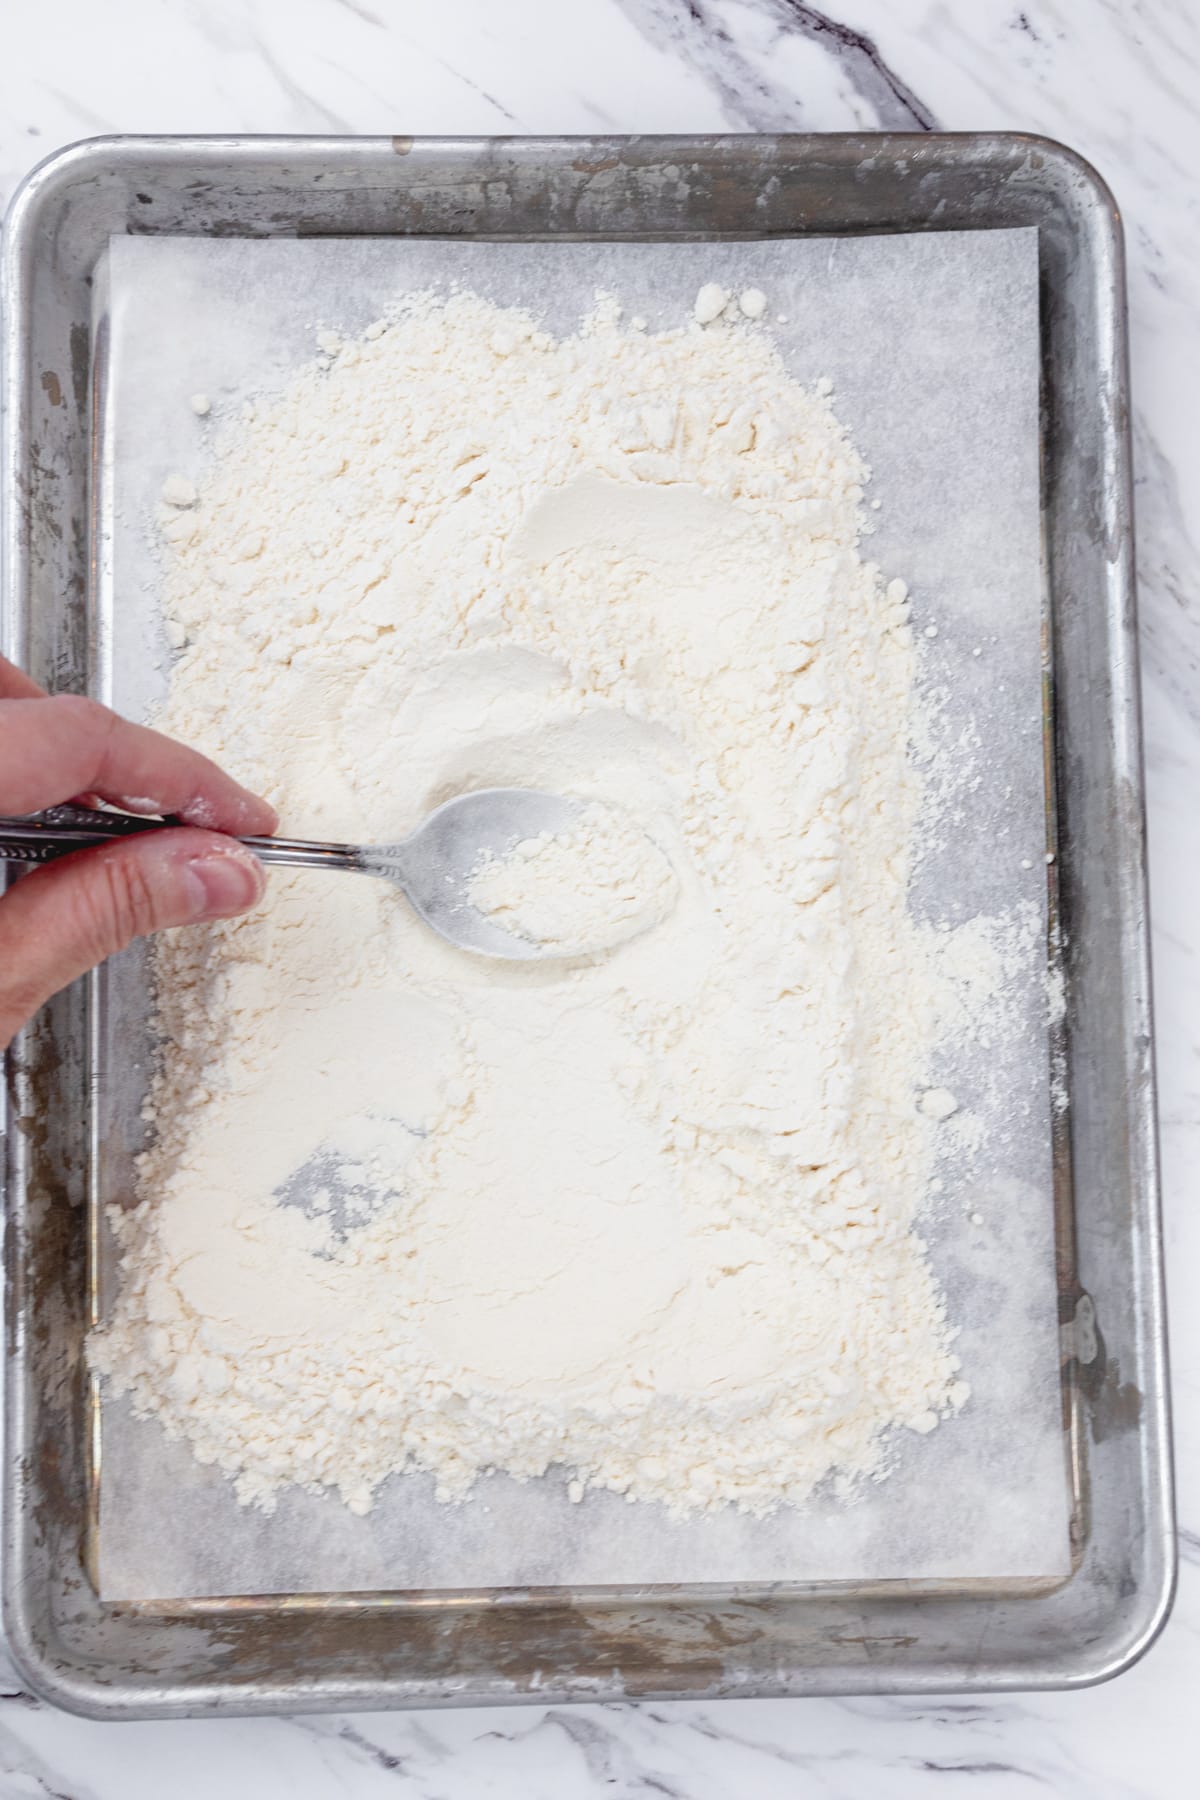 Top view of flour being spread on a parchment-lined baking sheet.